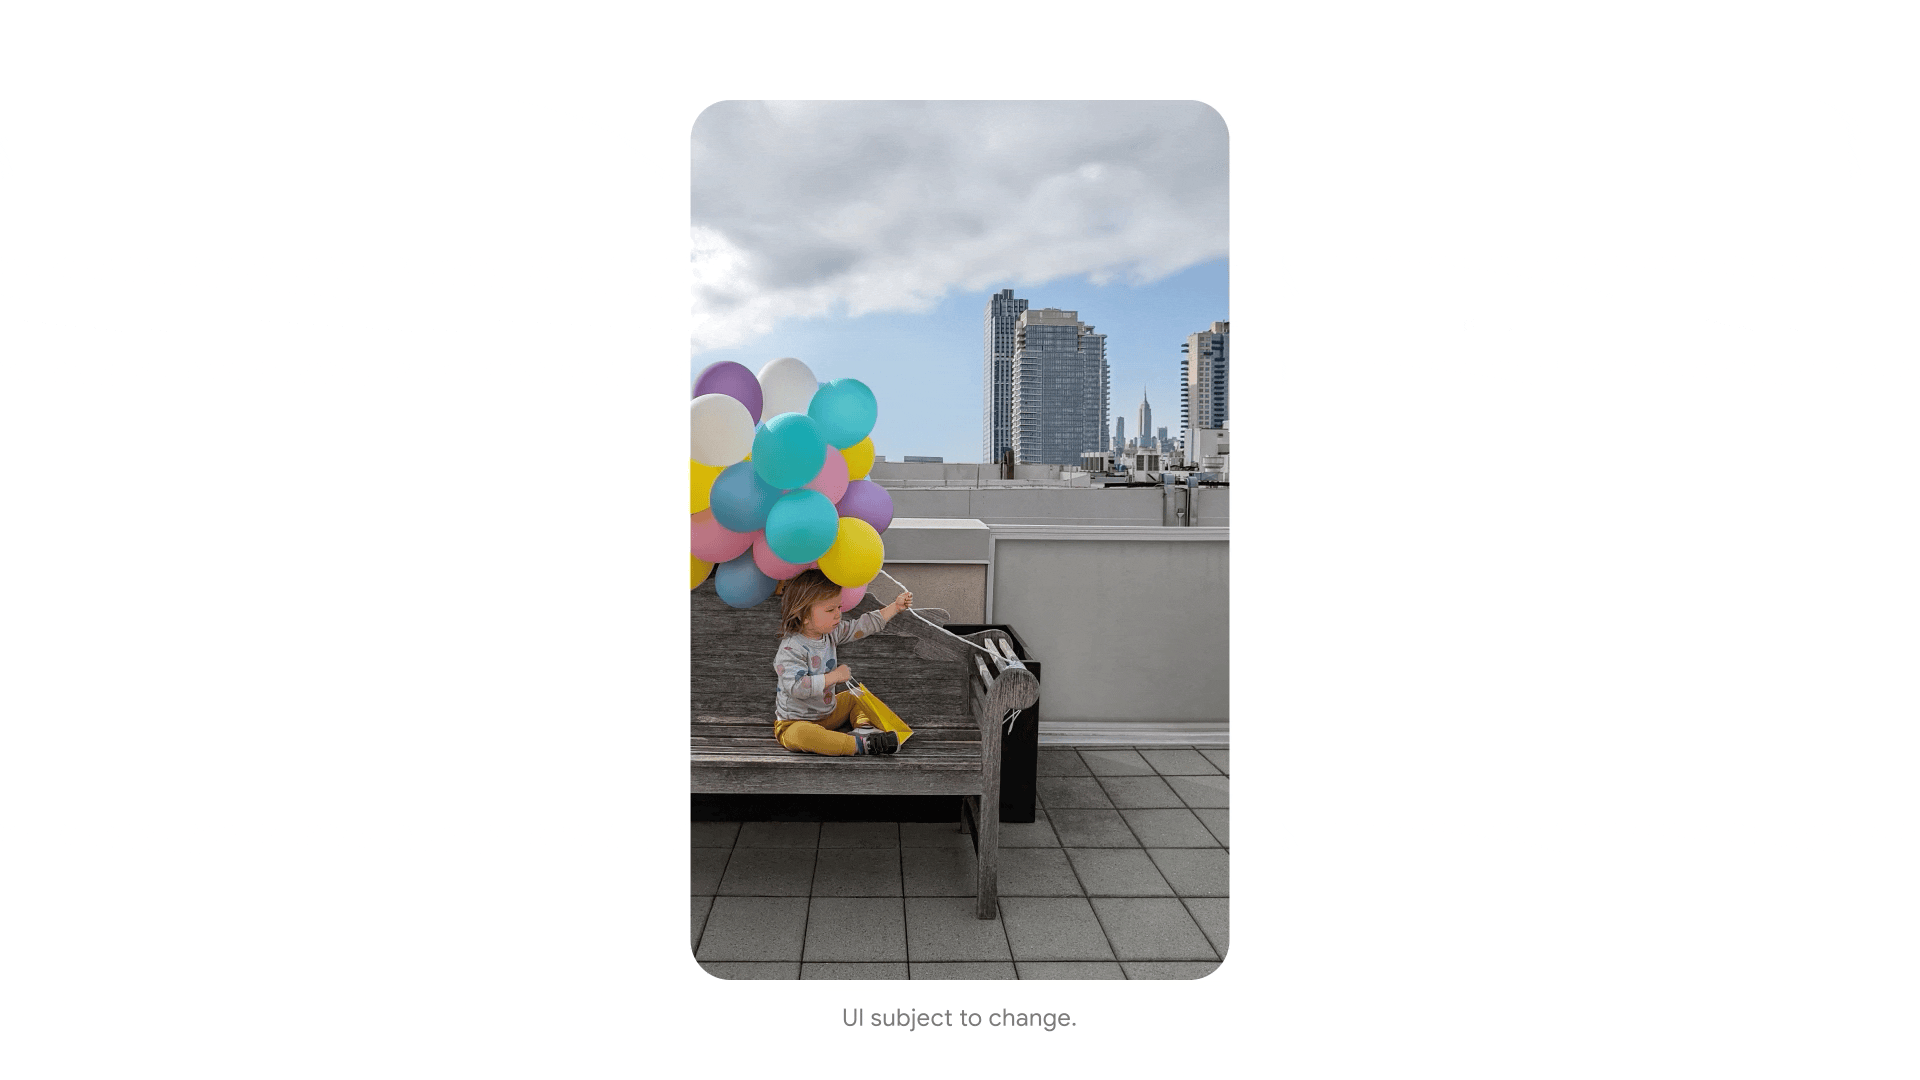 An animation of a toddler-aged boy on a bench on a rooftop, holding a bunch of colorful balloons, with a city skyline in the background. In the shot on the right the boy is centered, you see more of the bench and balloons, and the sky is clearer.